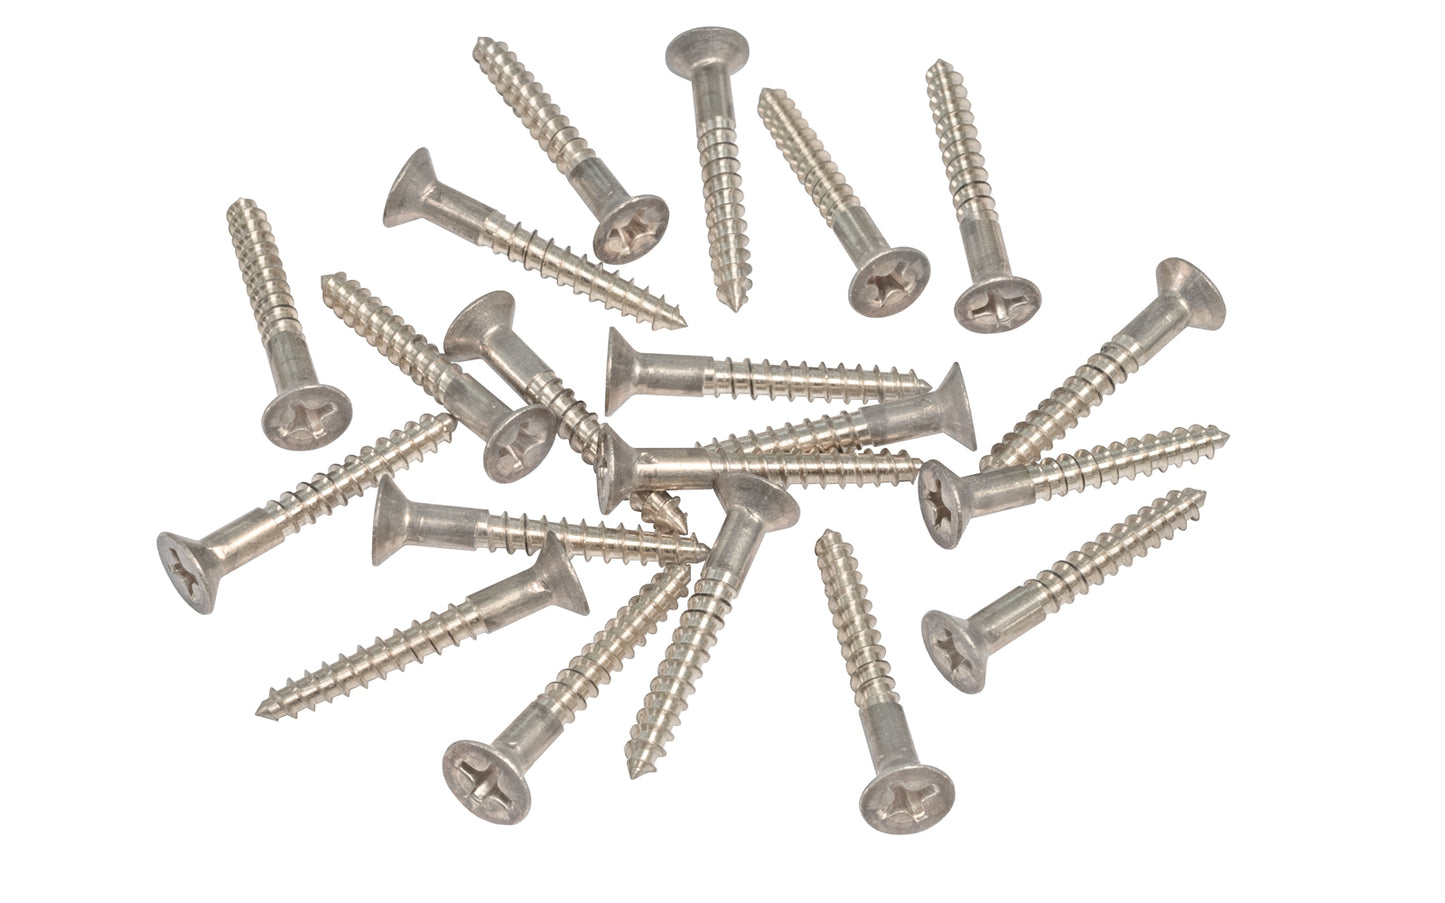 Solid Brass #7 x 1" Flat Head Phillips Wood Screws. Traditional & classic vintage-style countersunk wood screws. Sold as 20 screws in bag. Polished Nickel Finish.